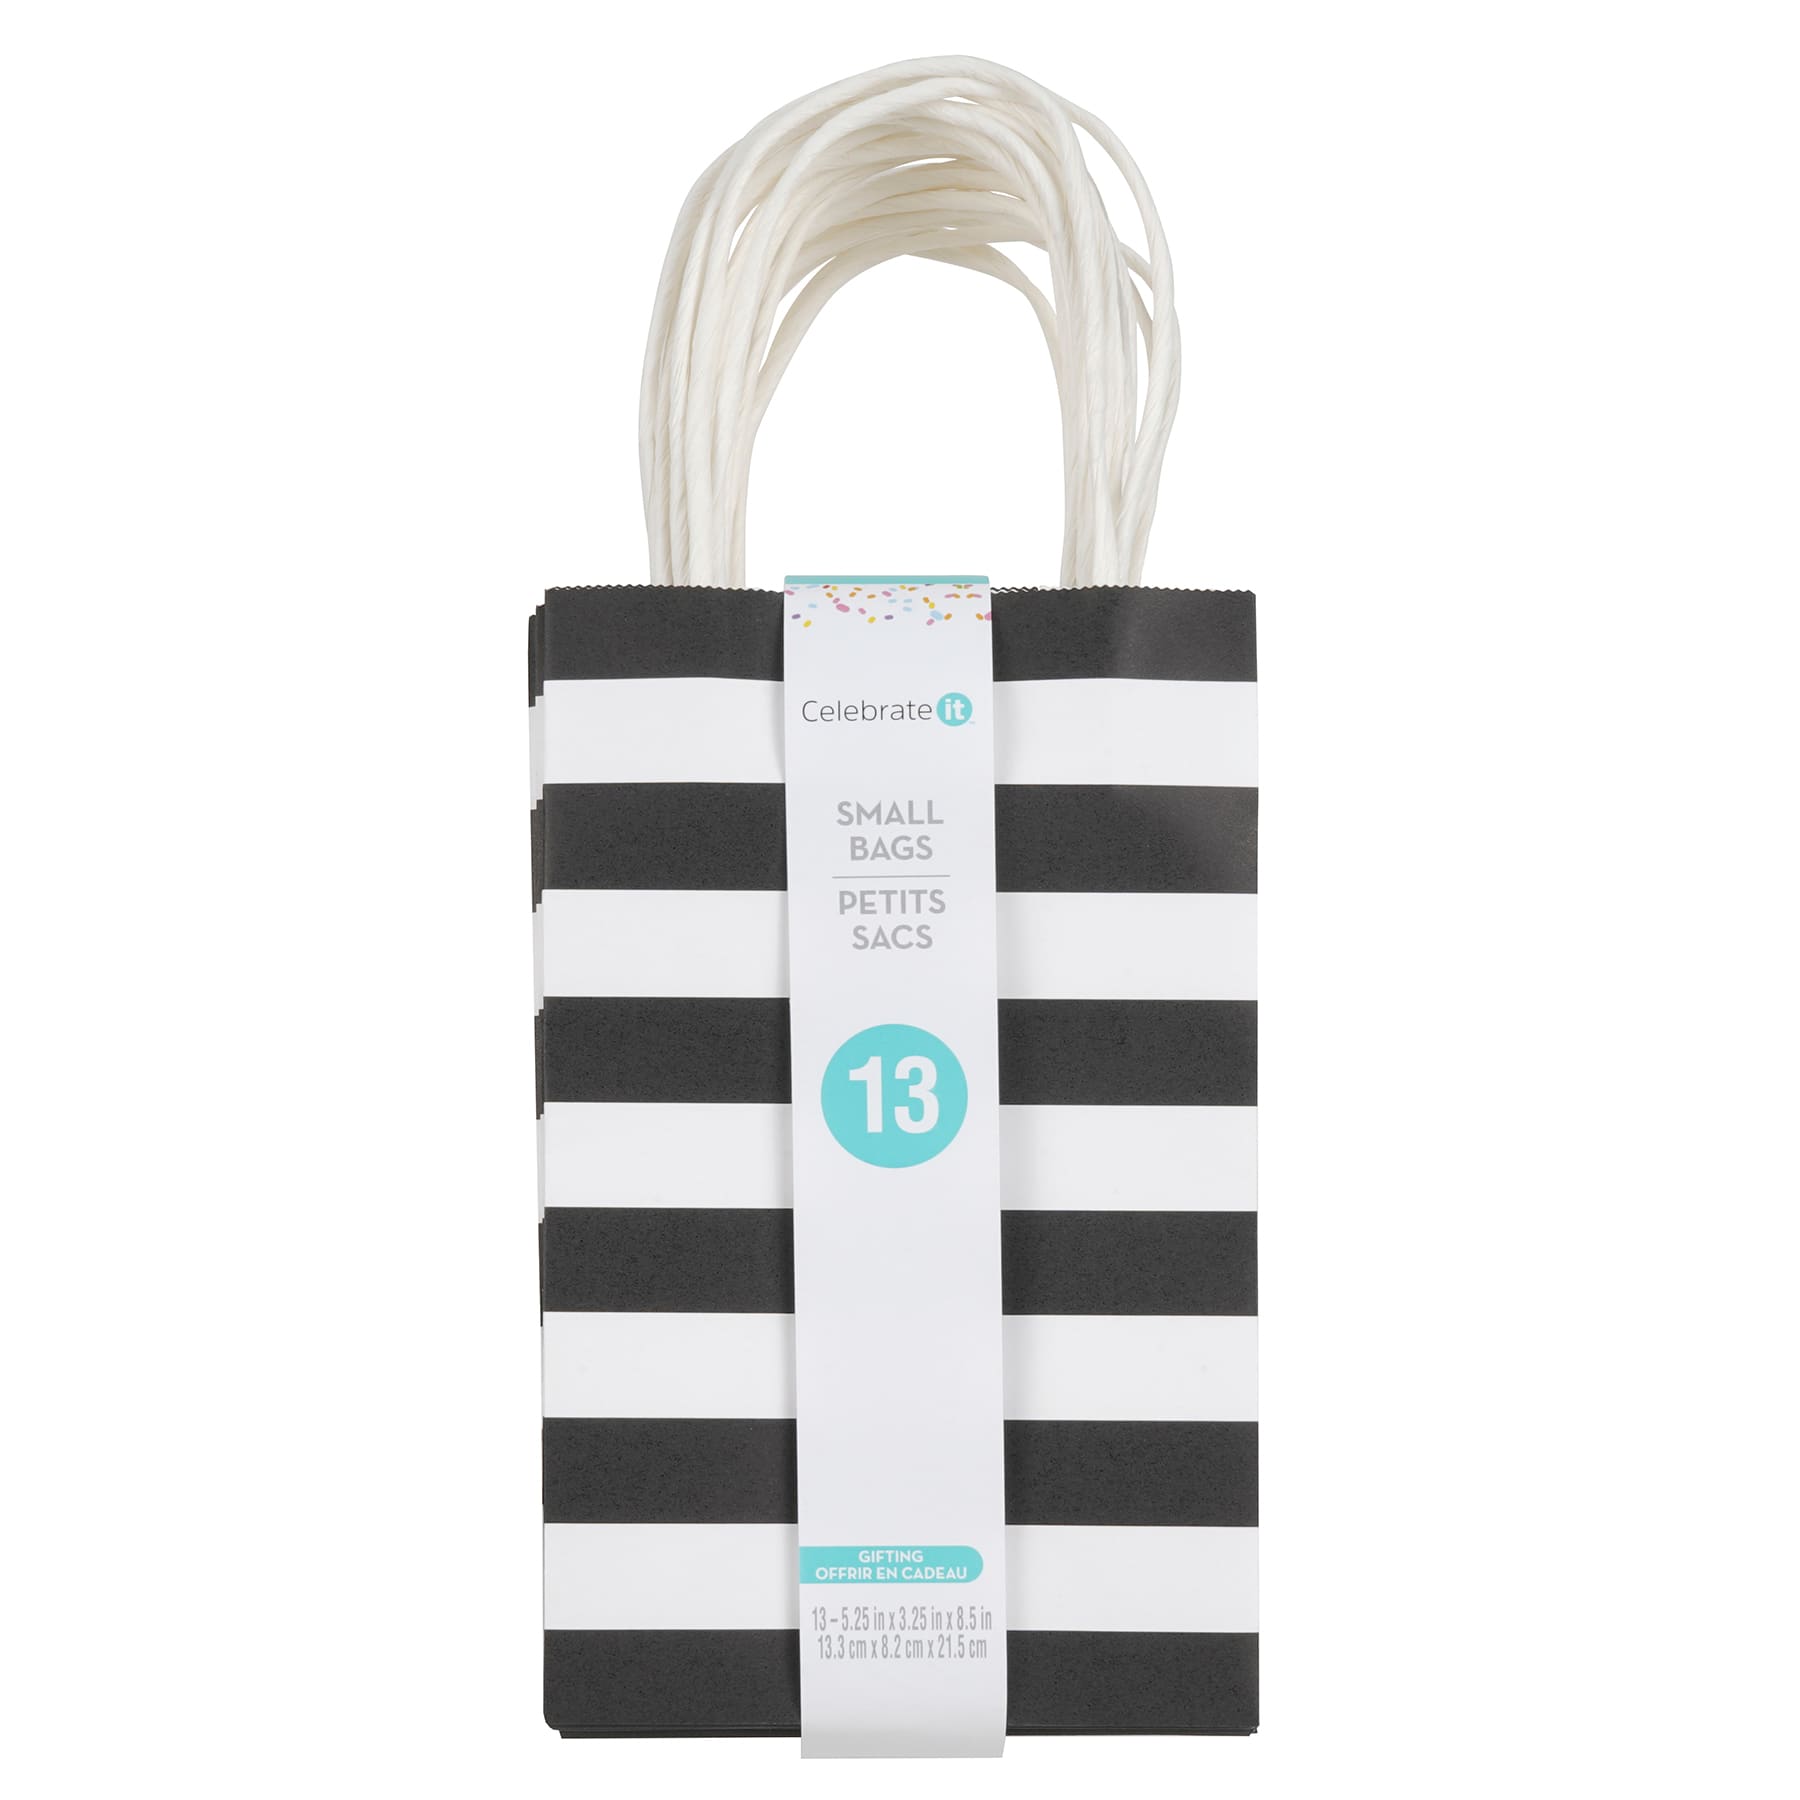  ADIDO EVA Small Striped Gift Bags with Handles Black and White  Kraft Paper Bags (12 PCS 8.2 x 6 x 3.1 In) : Health & Household